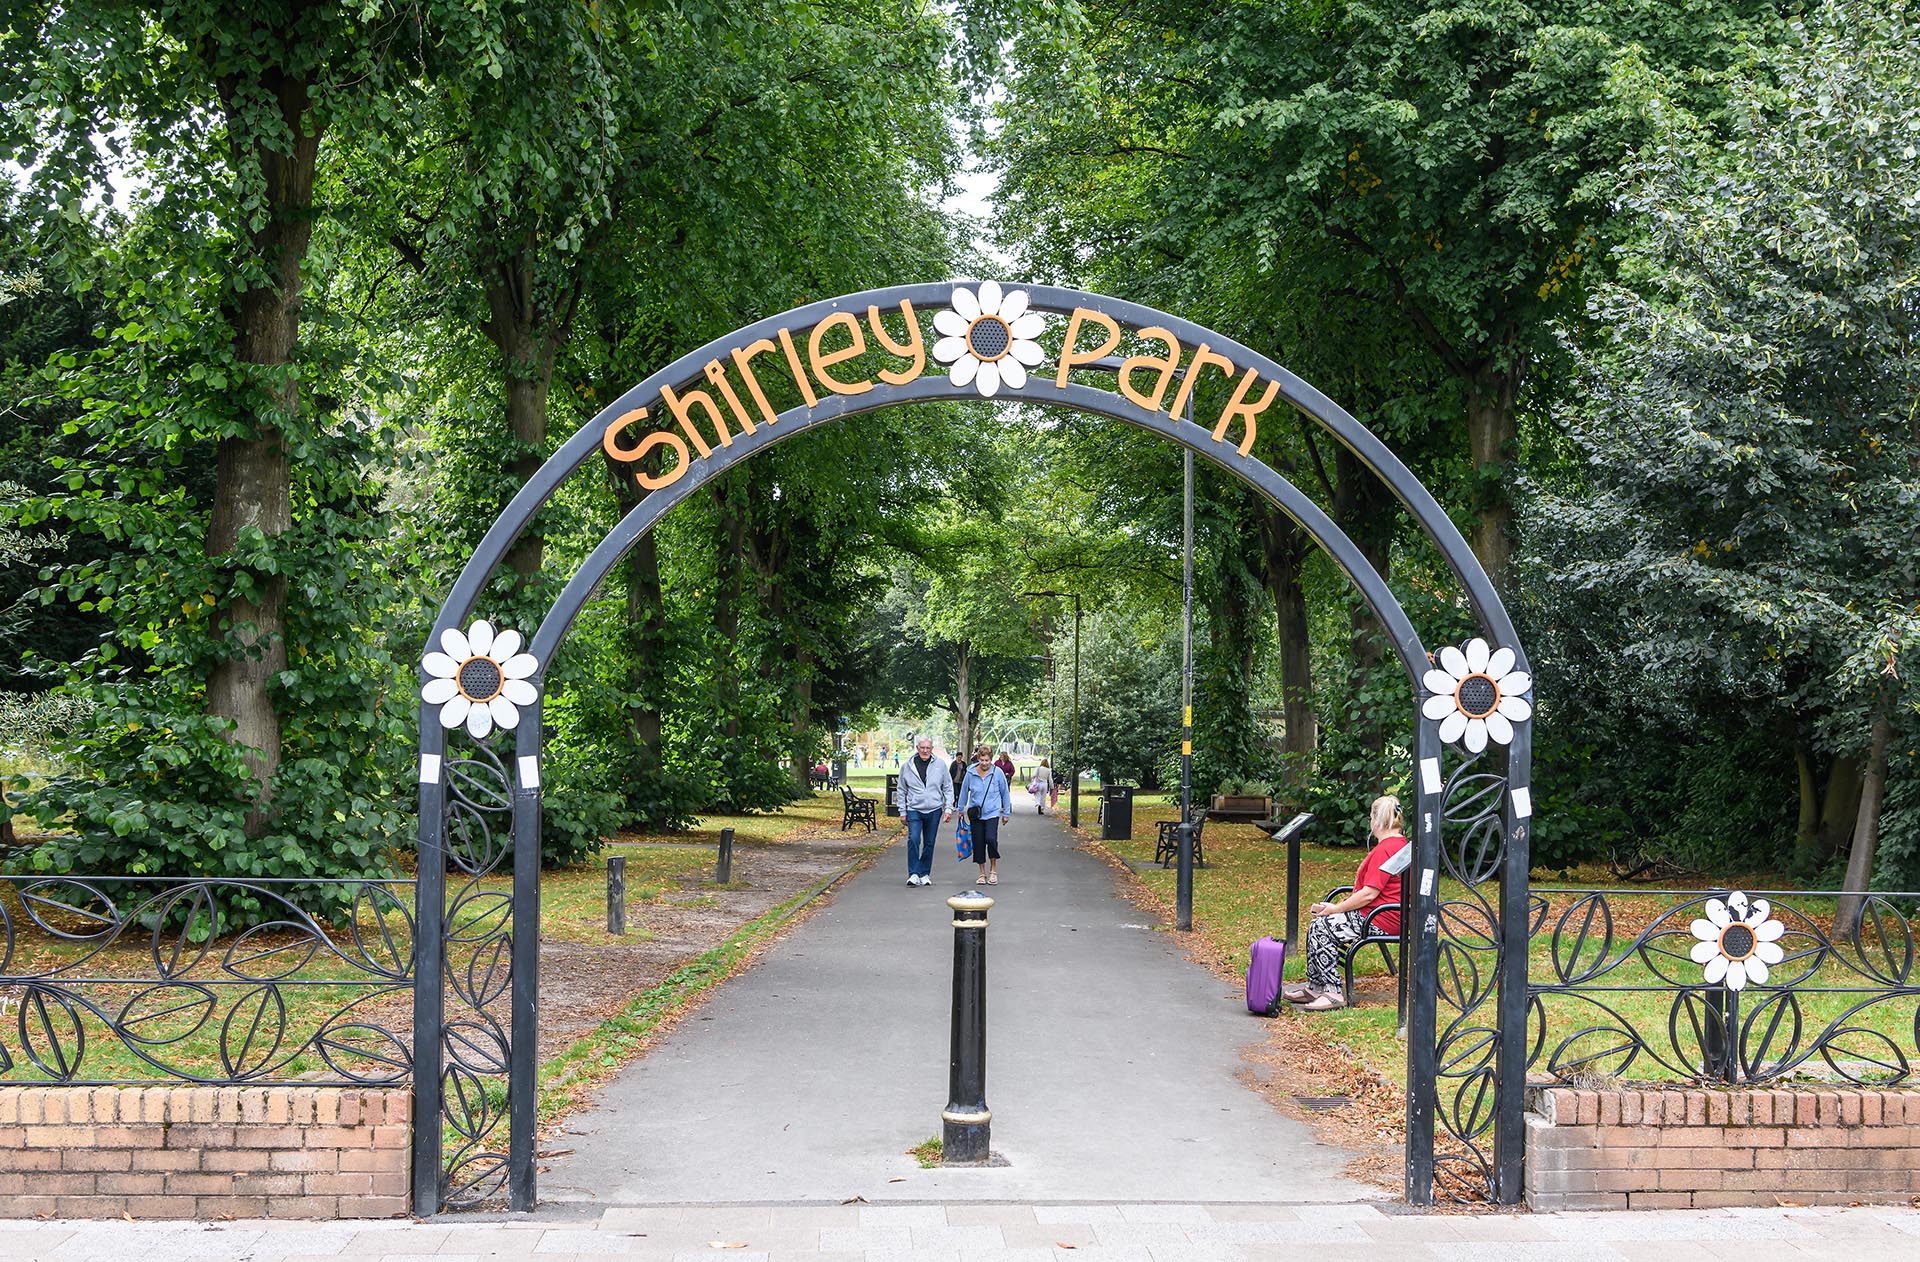 Visit Shirley, Solihull, and find out about its heritage.